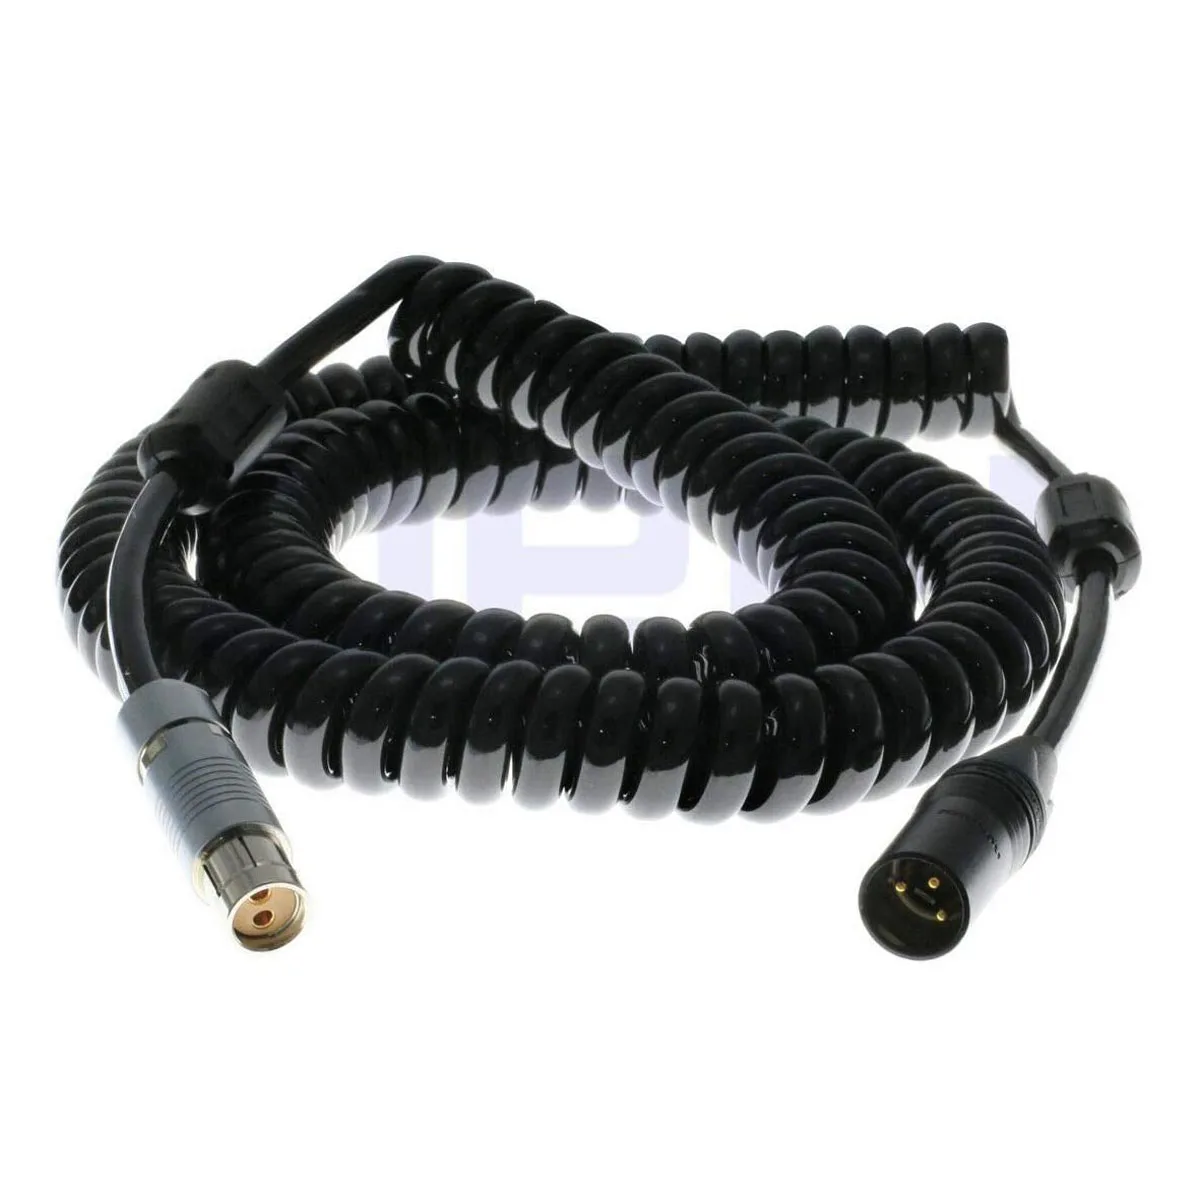 

Coiled Power Cable For ARRI Alexa XT SXT Cameras XLR 3 Pin Male To Fischer 2 Female